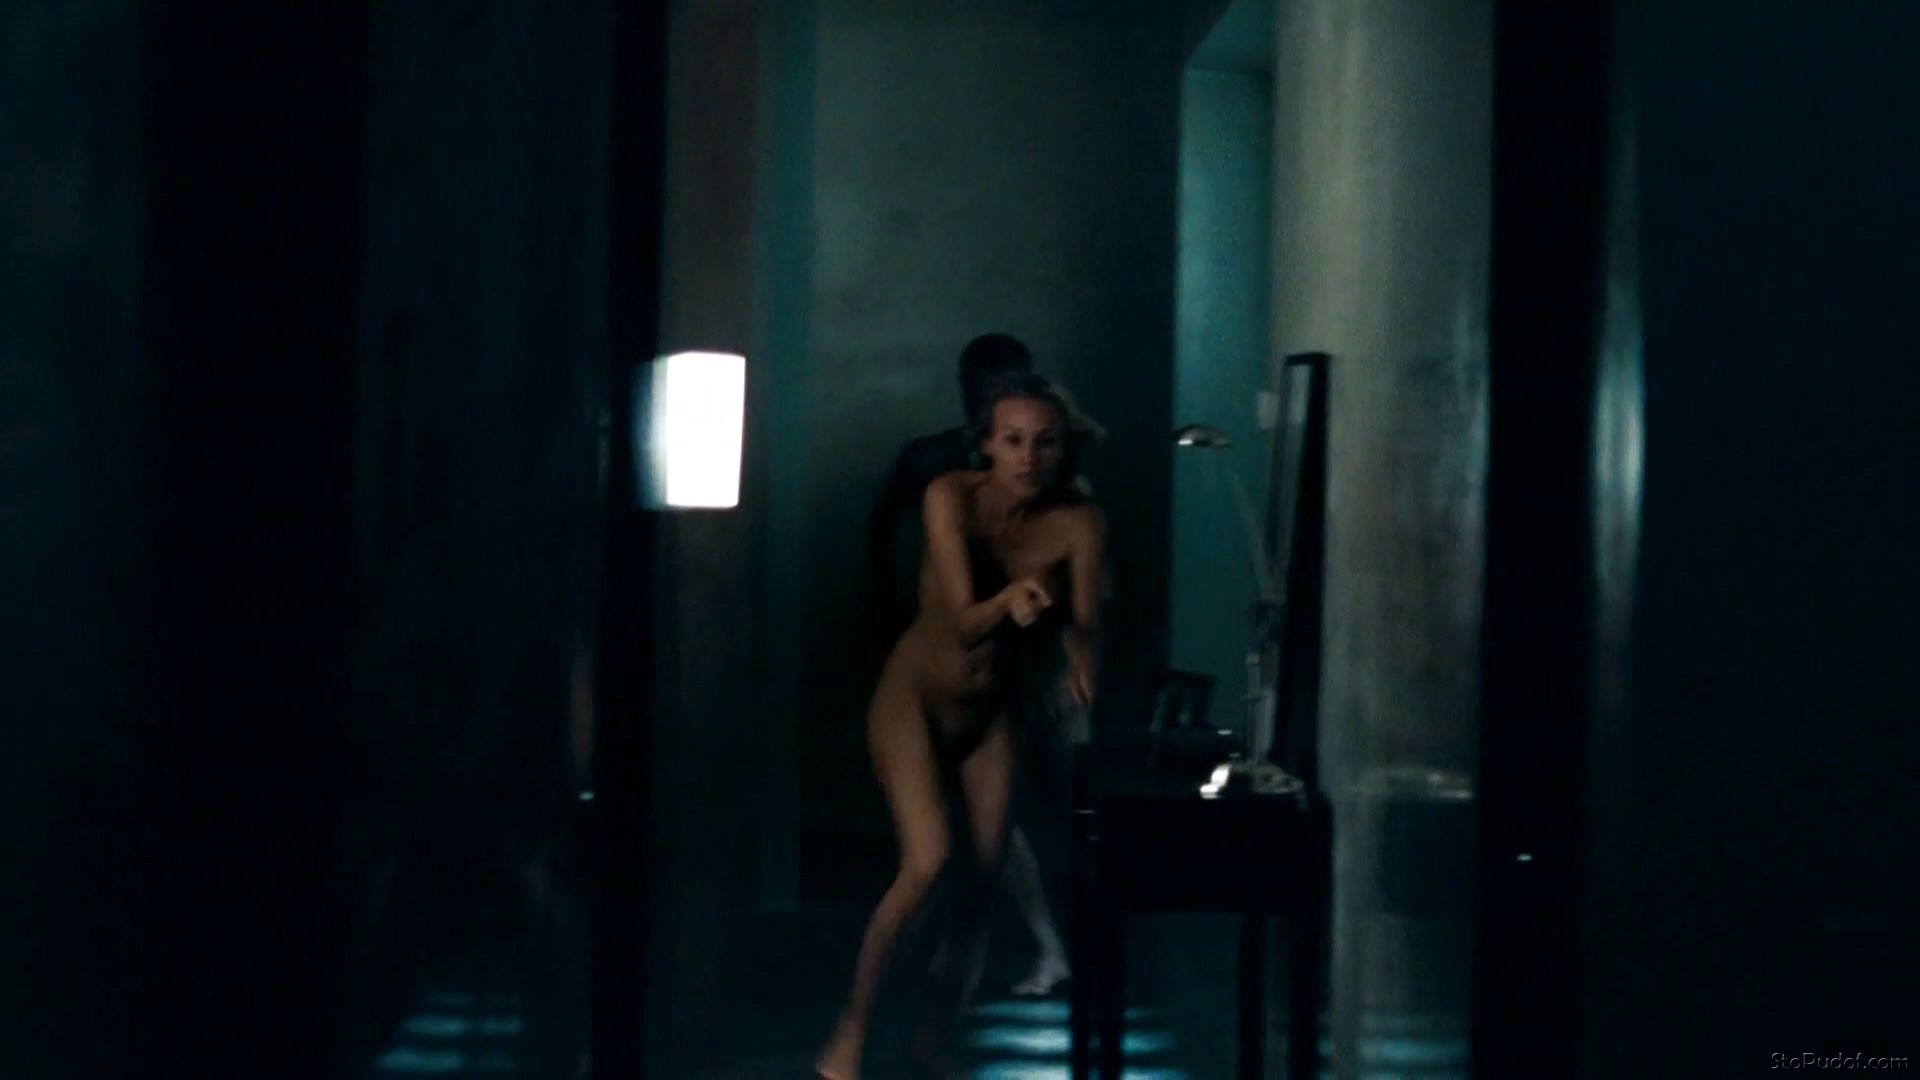 Diane Kruger naked picture gallery - UkPhotoSafari